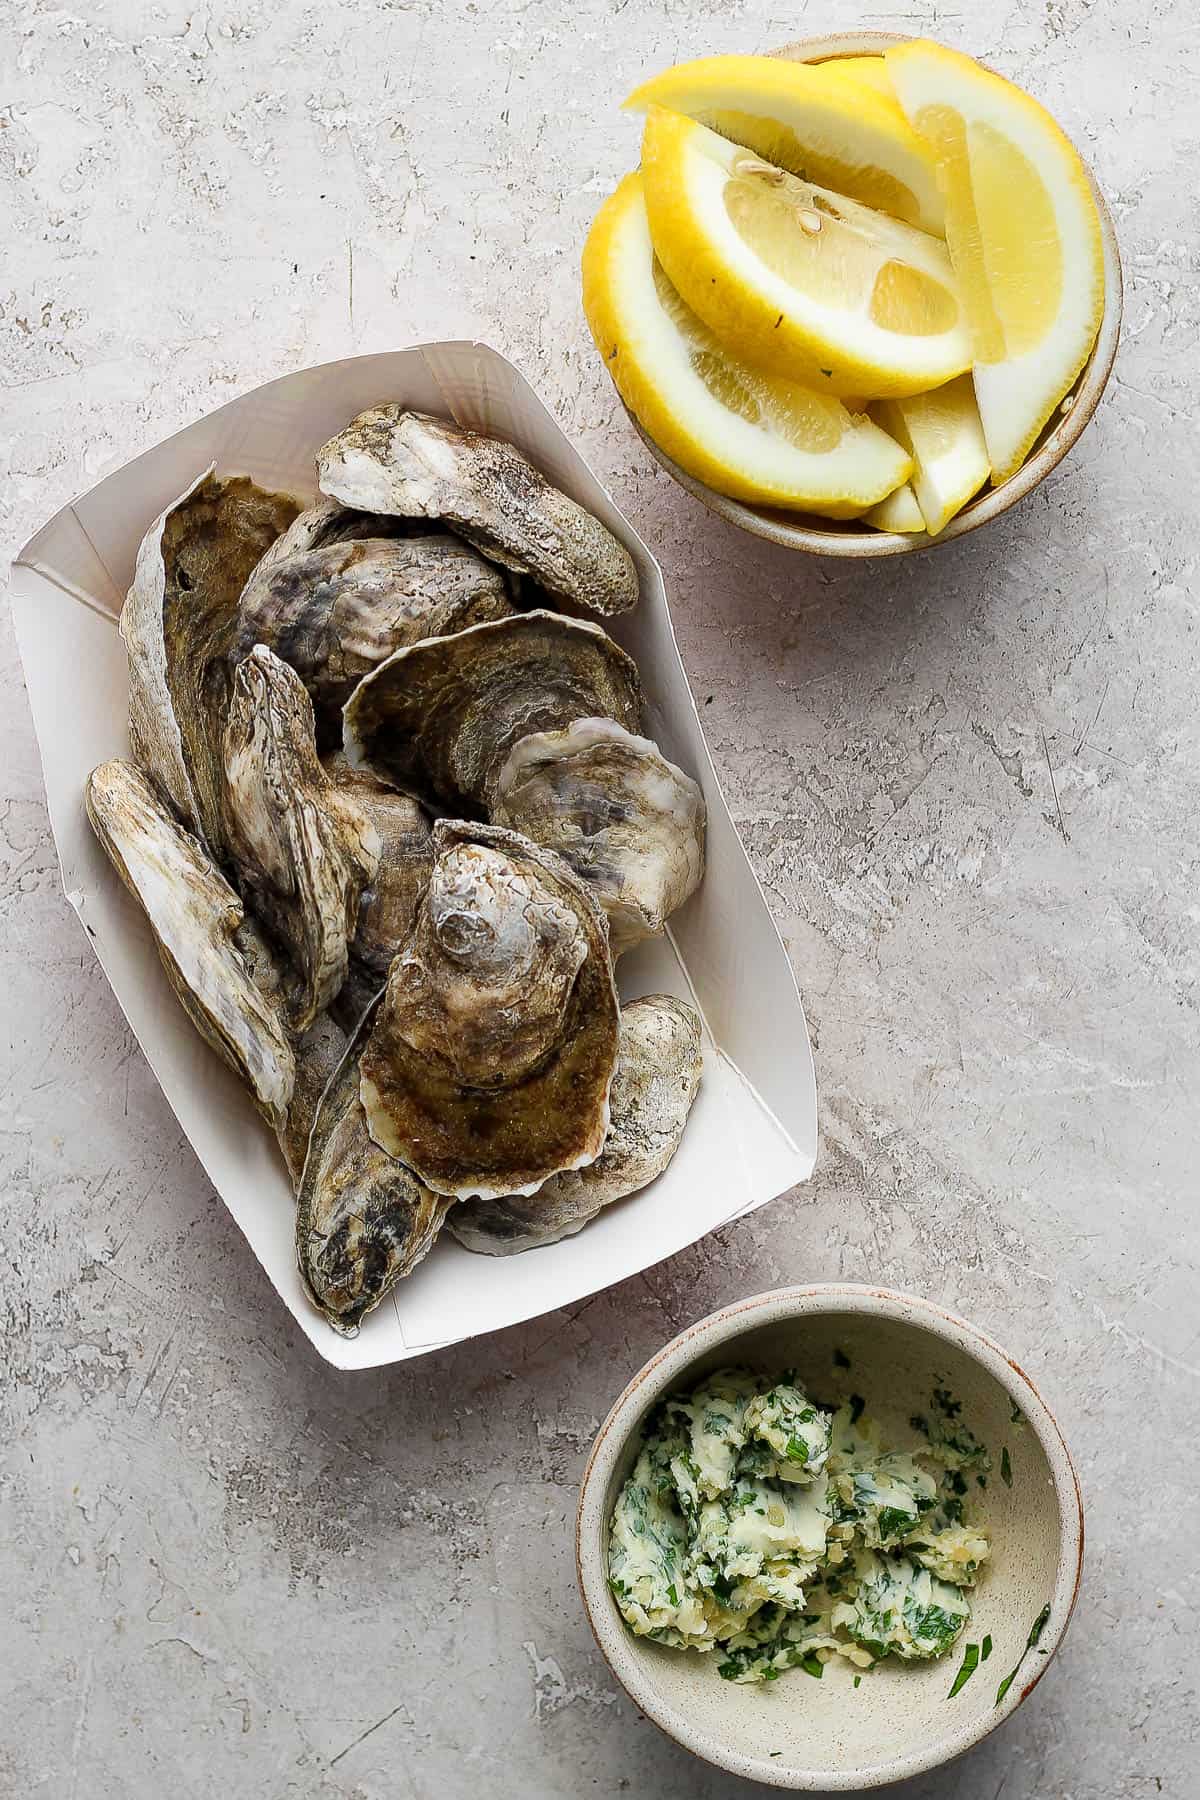 Raw oysters, lemon wedges, and herbed butter in separate bowls.